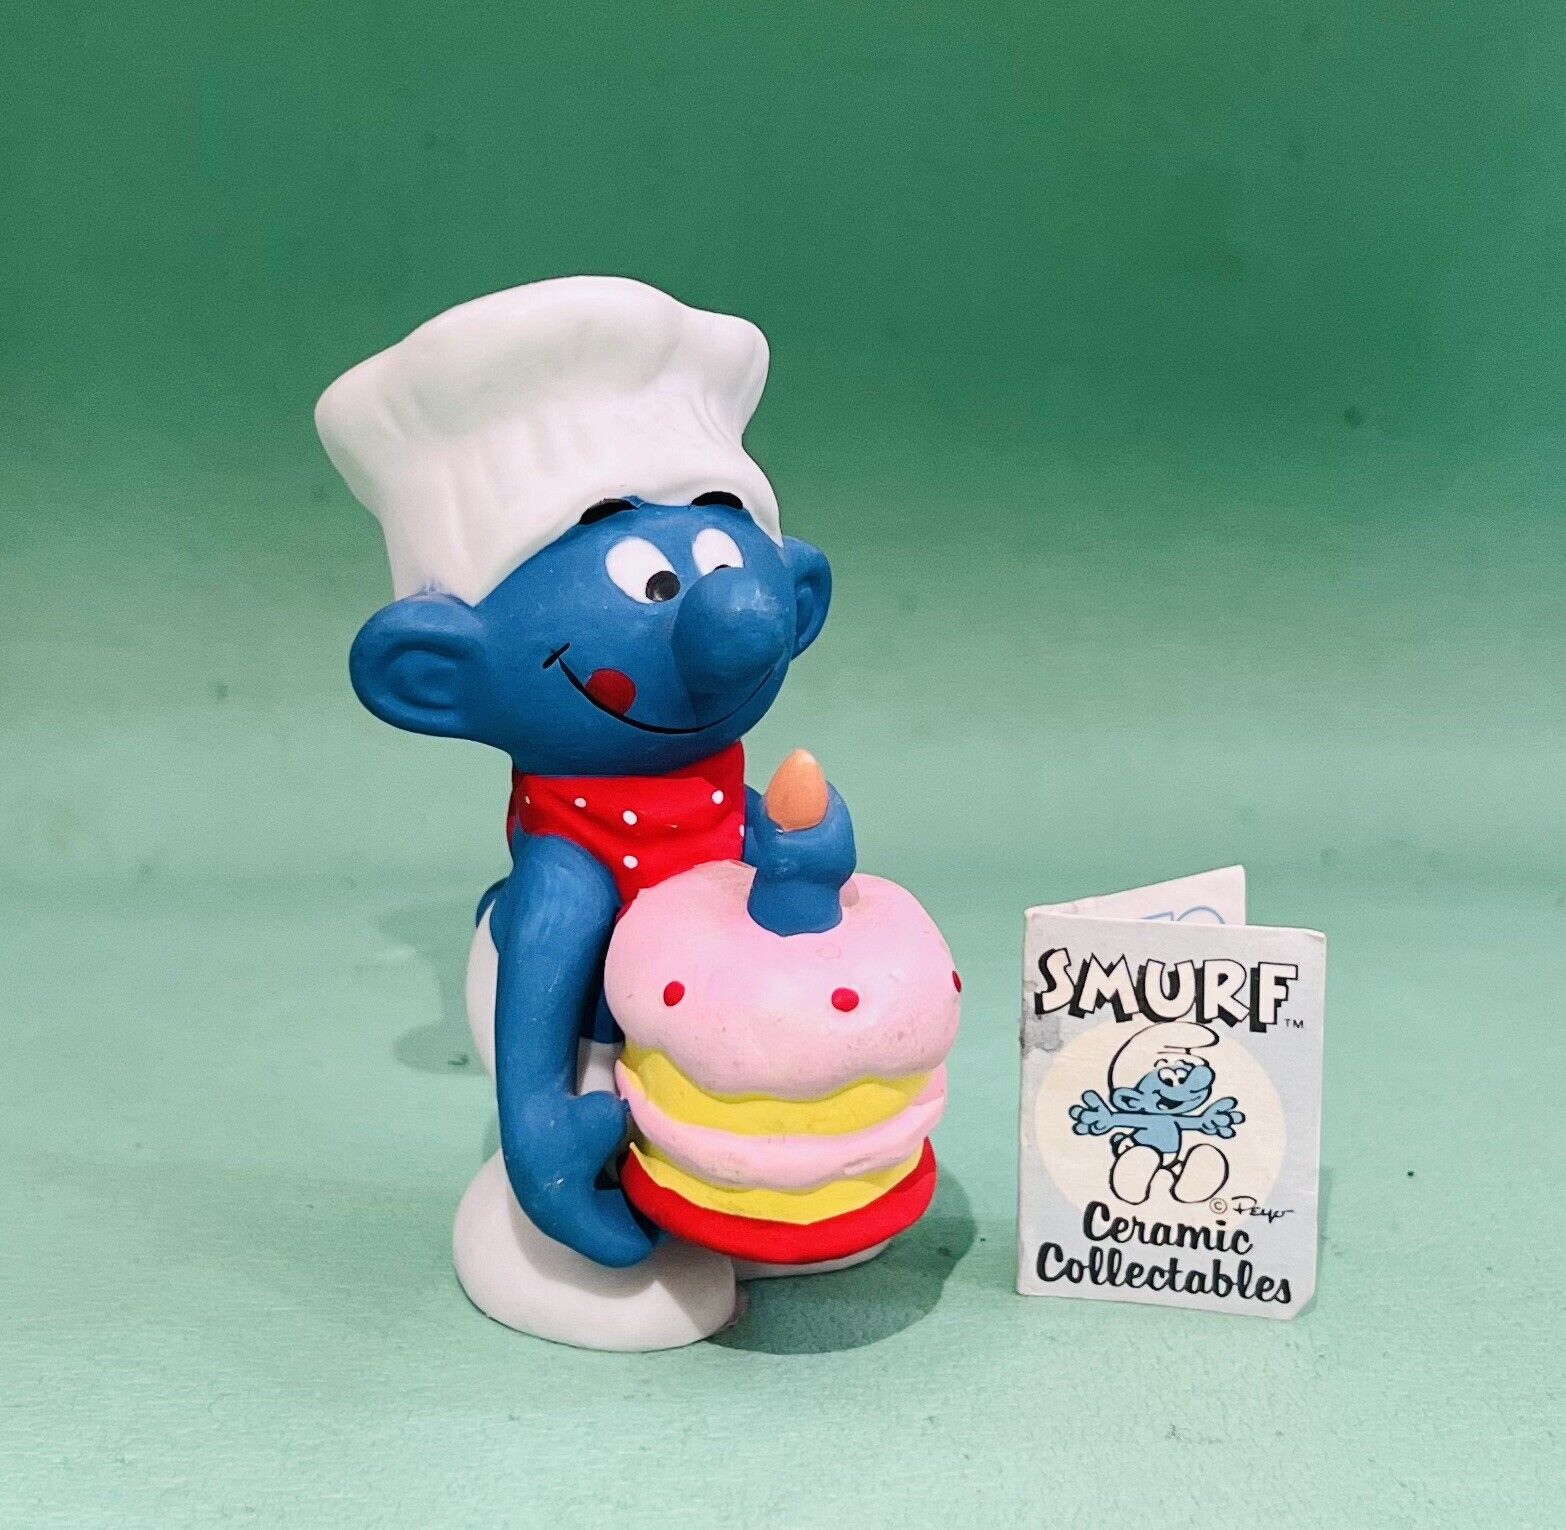 Vintage 1982 Smurf Ceramic Figruine by Wallace Berrie with Tag, Smurf B-Day Cake